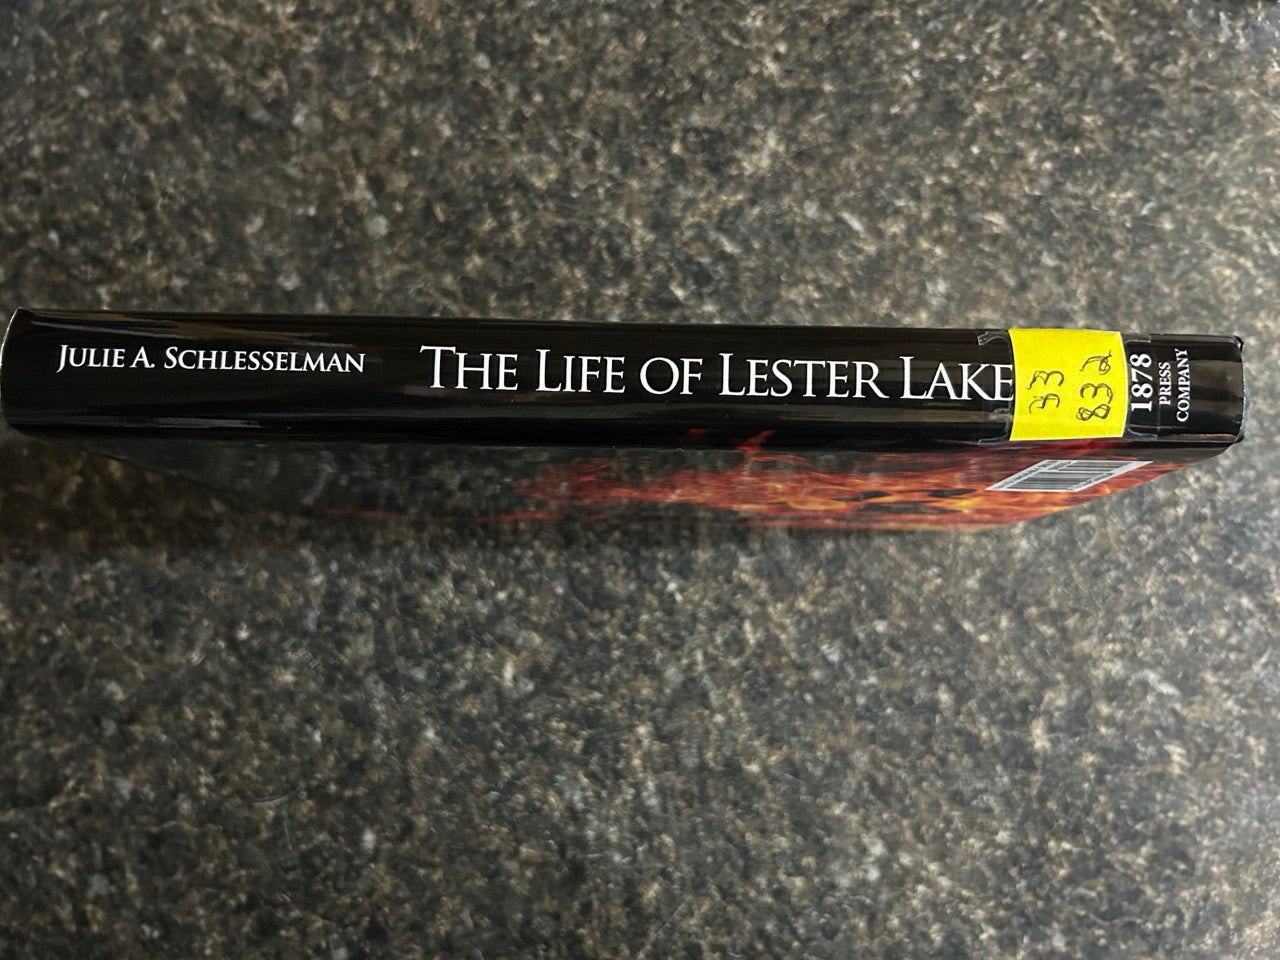 Buried Alive Every Afternoon Burned Alive Every Evening, The Life of Lester Lake - Julie A. Schlesselman